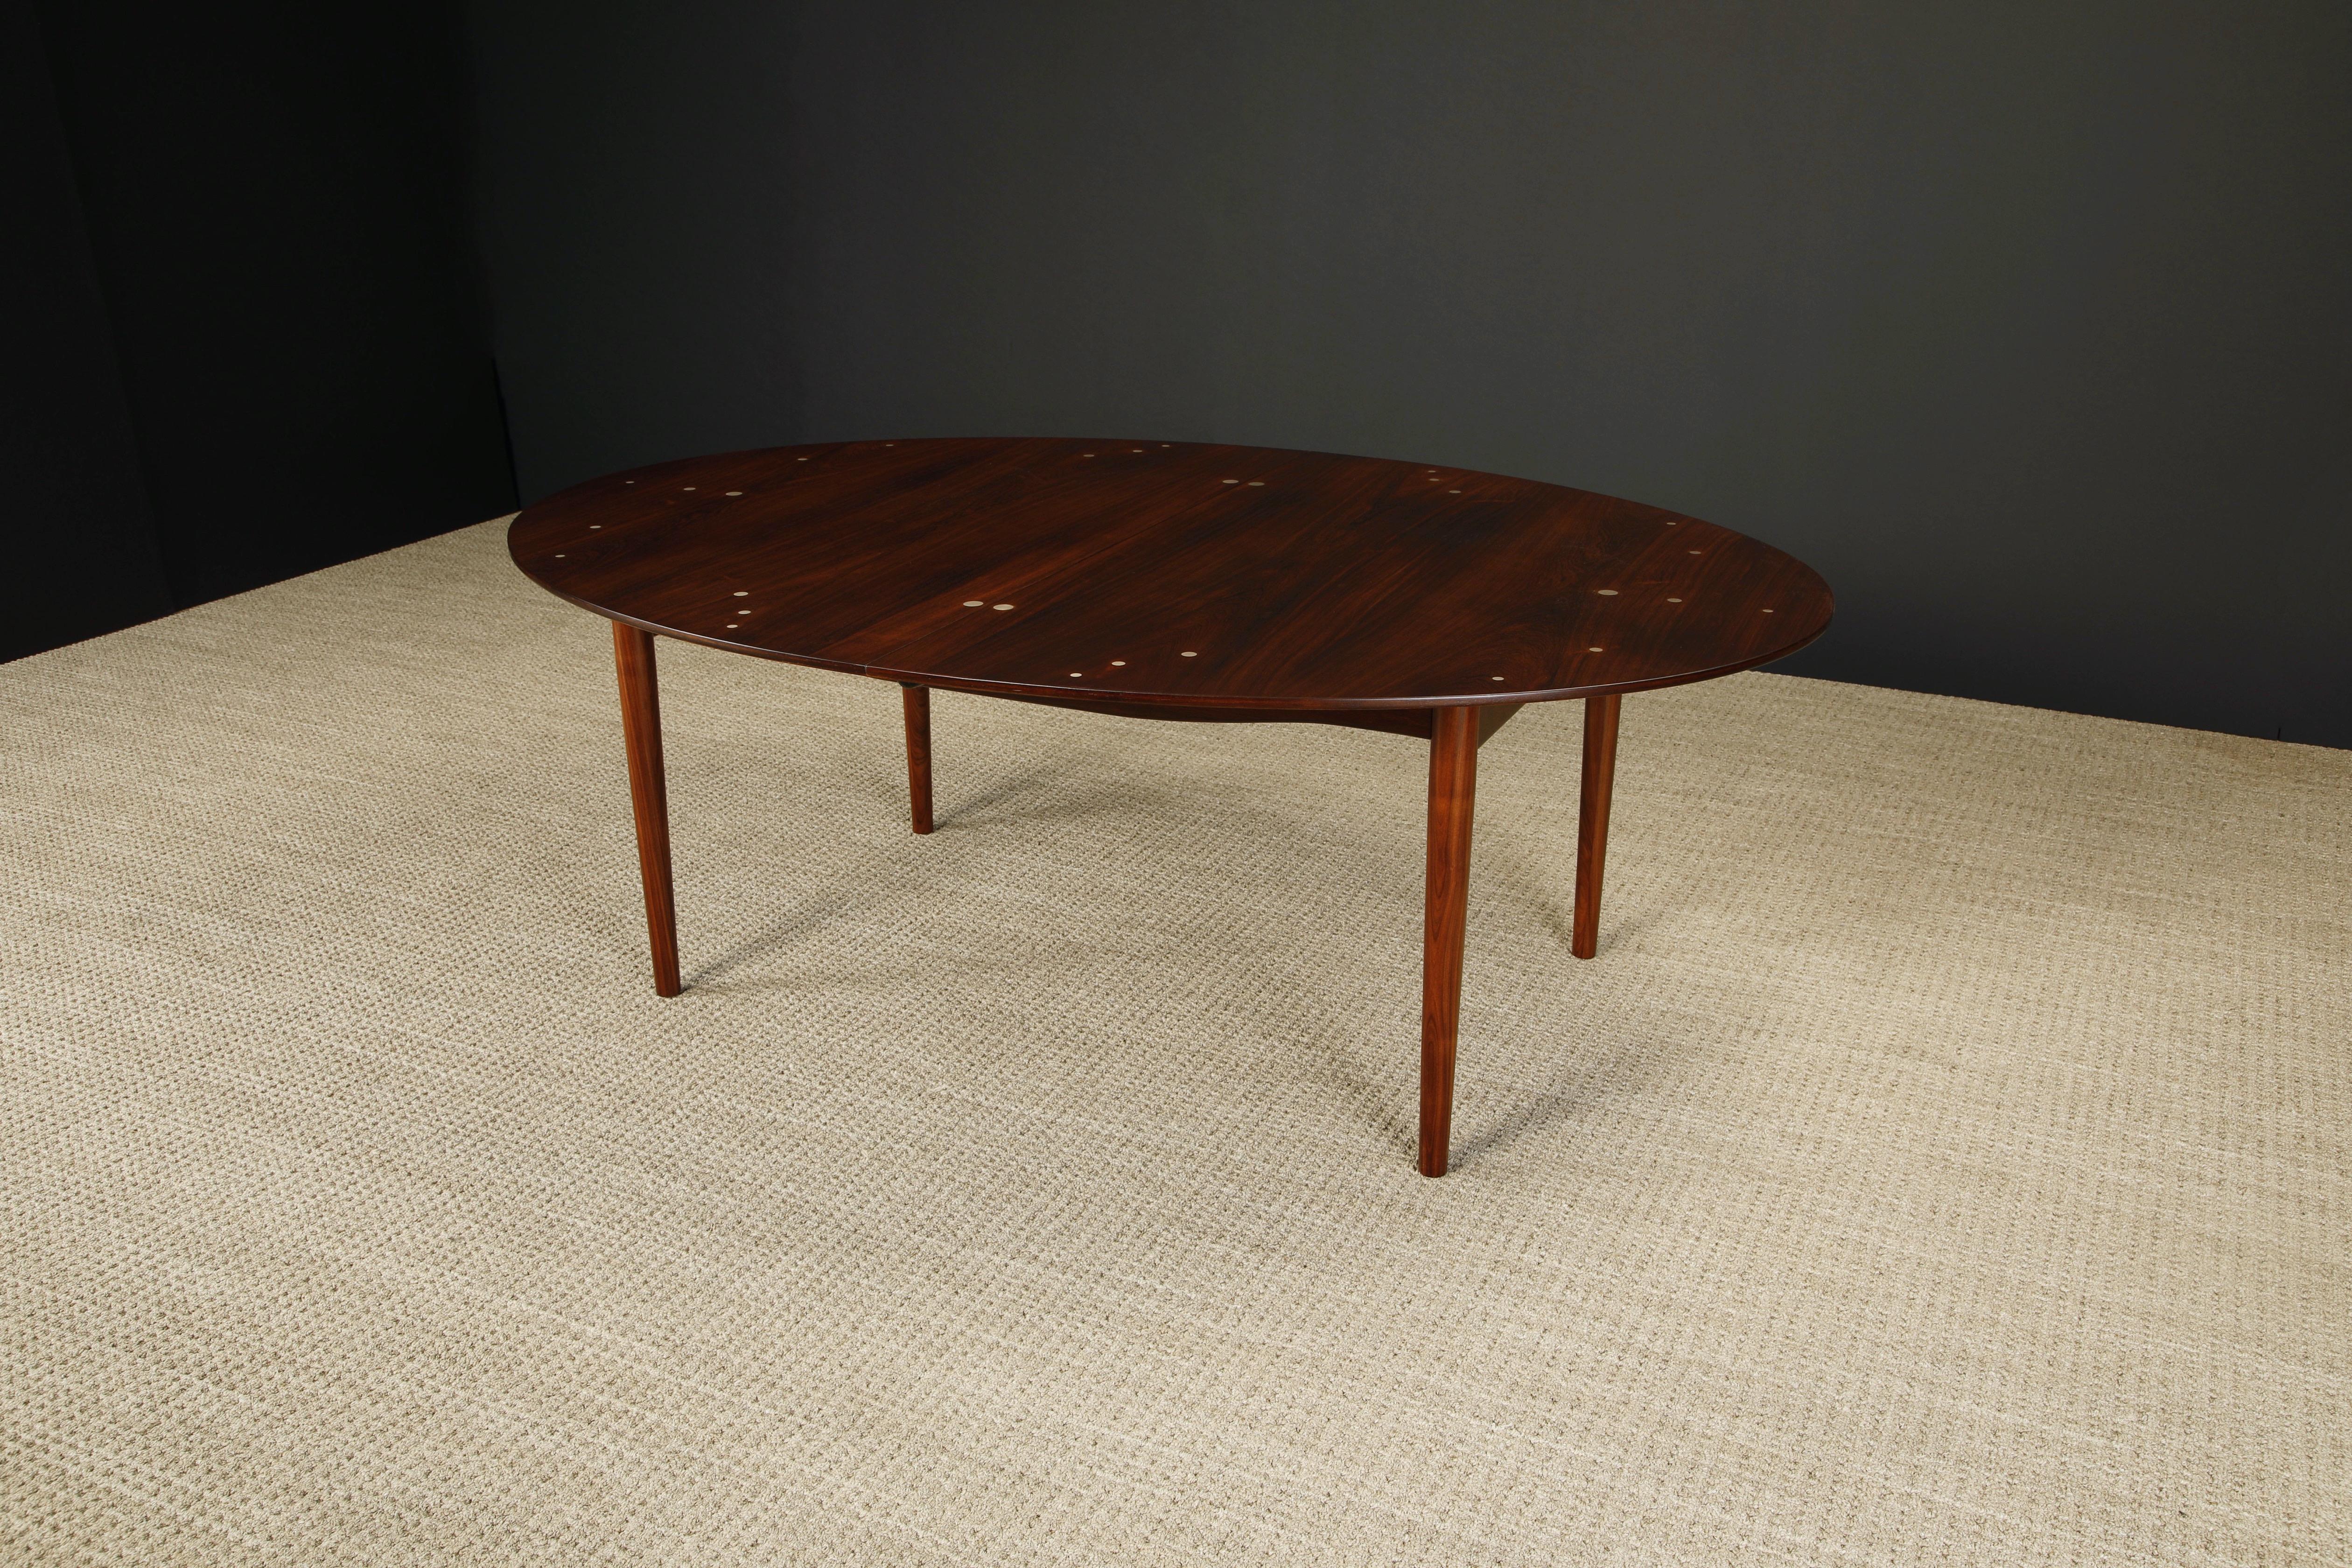 Finn Juhl 'Judas' Rosewood and Sterling Silver Dining Table, c 1950s, Signed For Sale 1